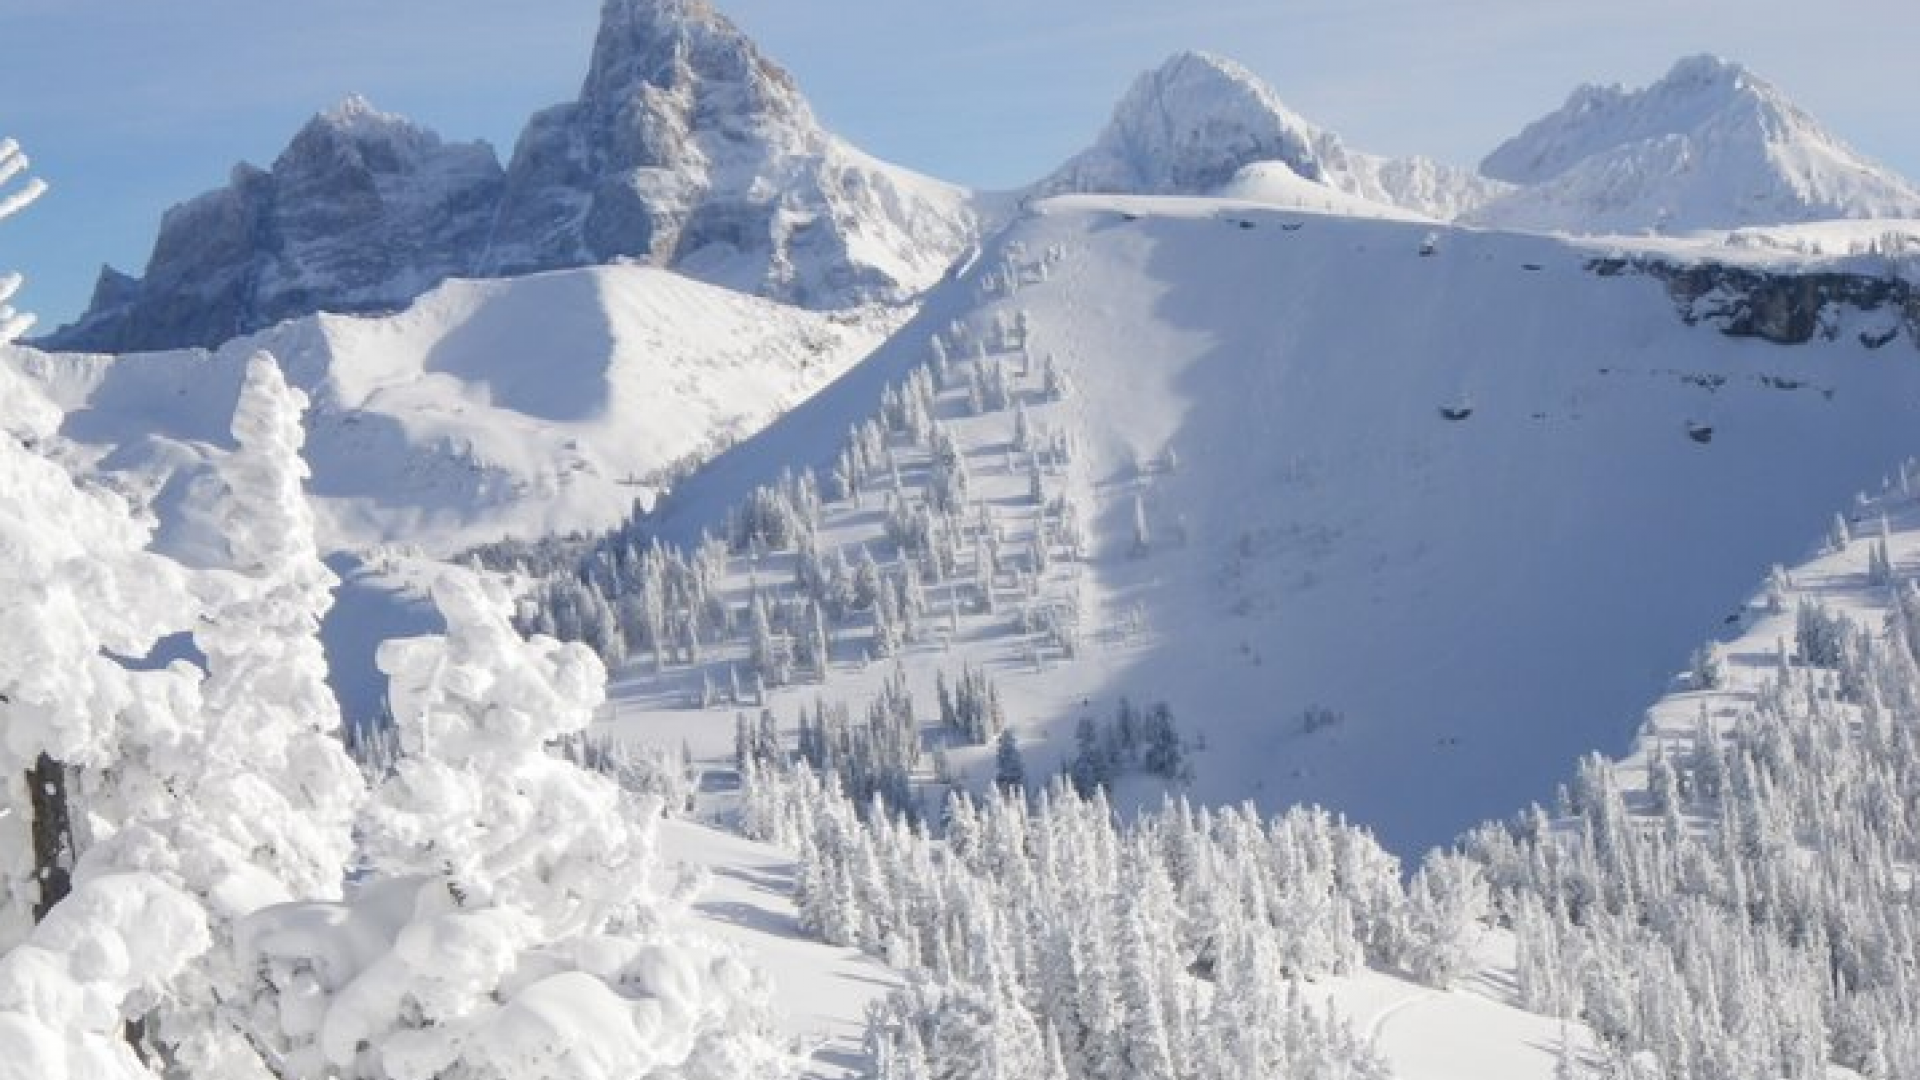 Credit: Jackson Hole Central Reservations